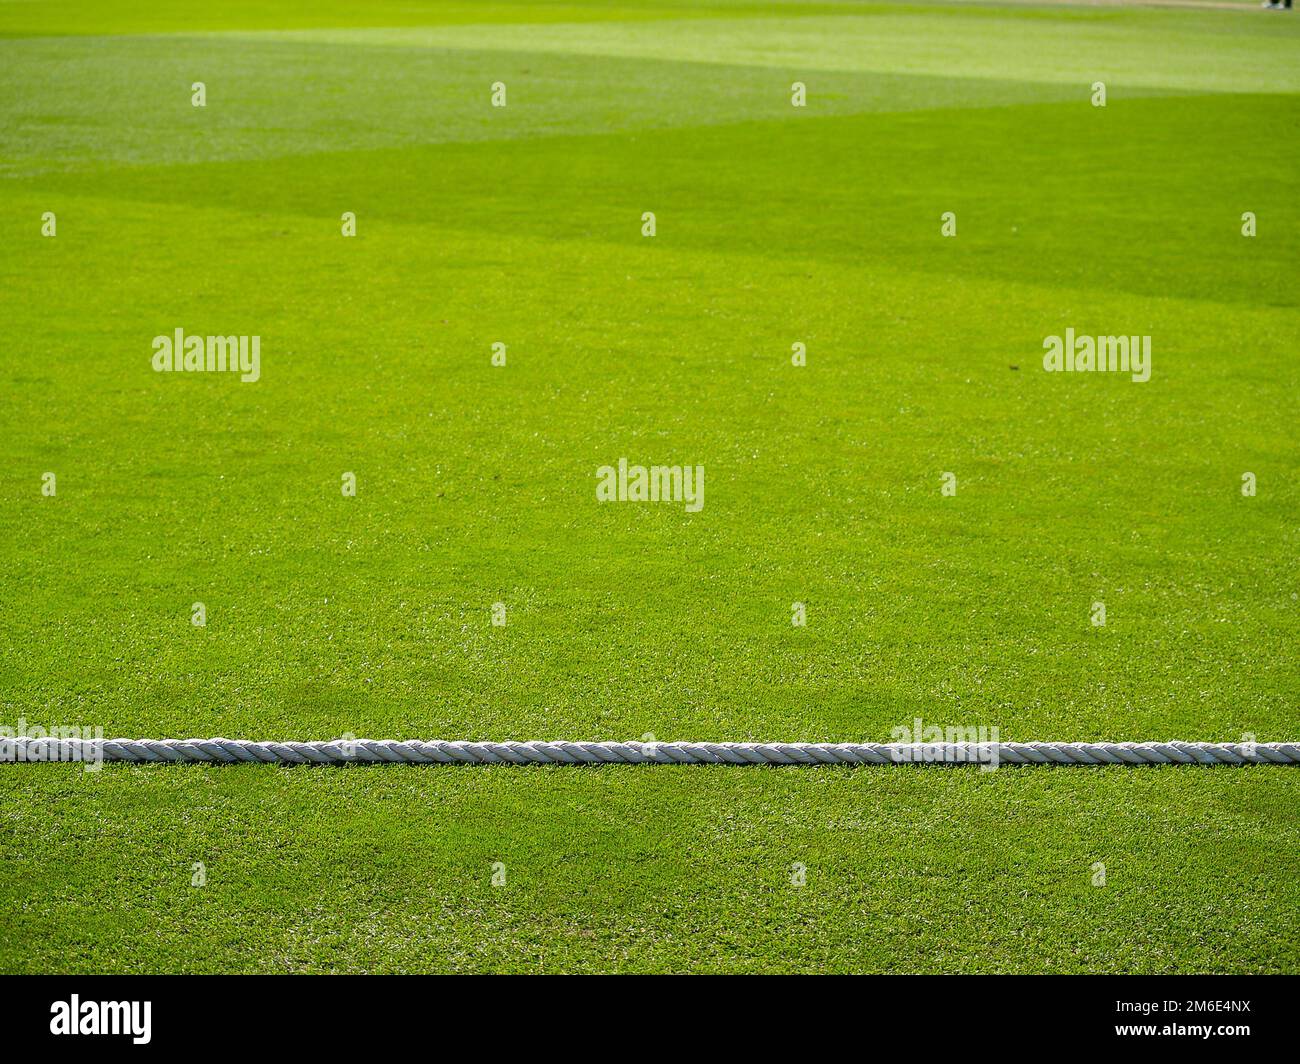 White rope divides green lawn as boundary rope on cricket pitch. Stock Photo